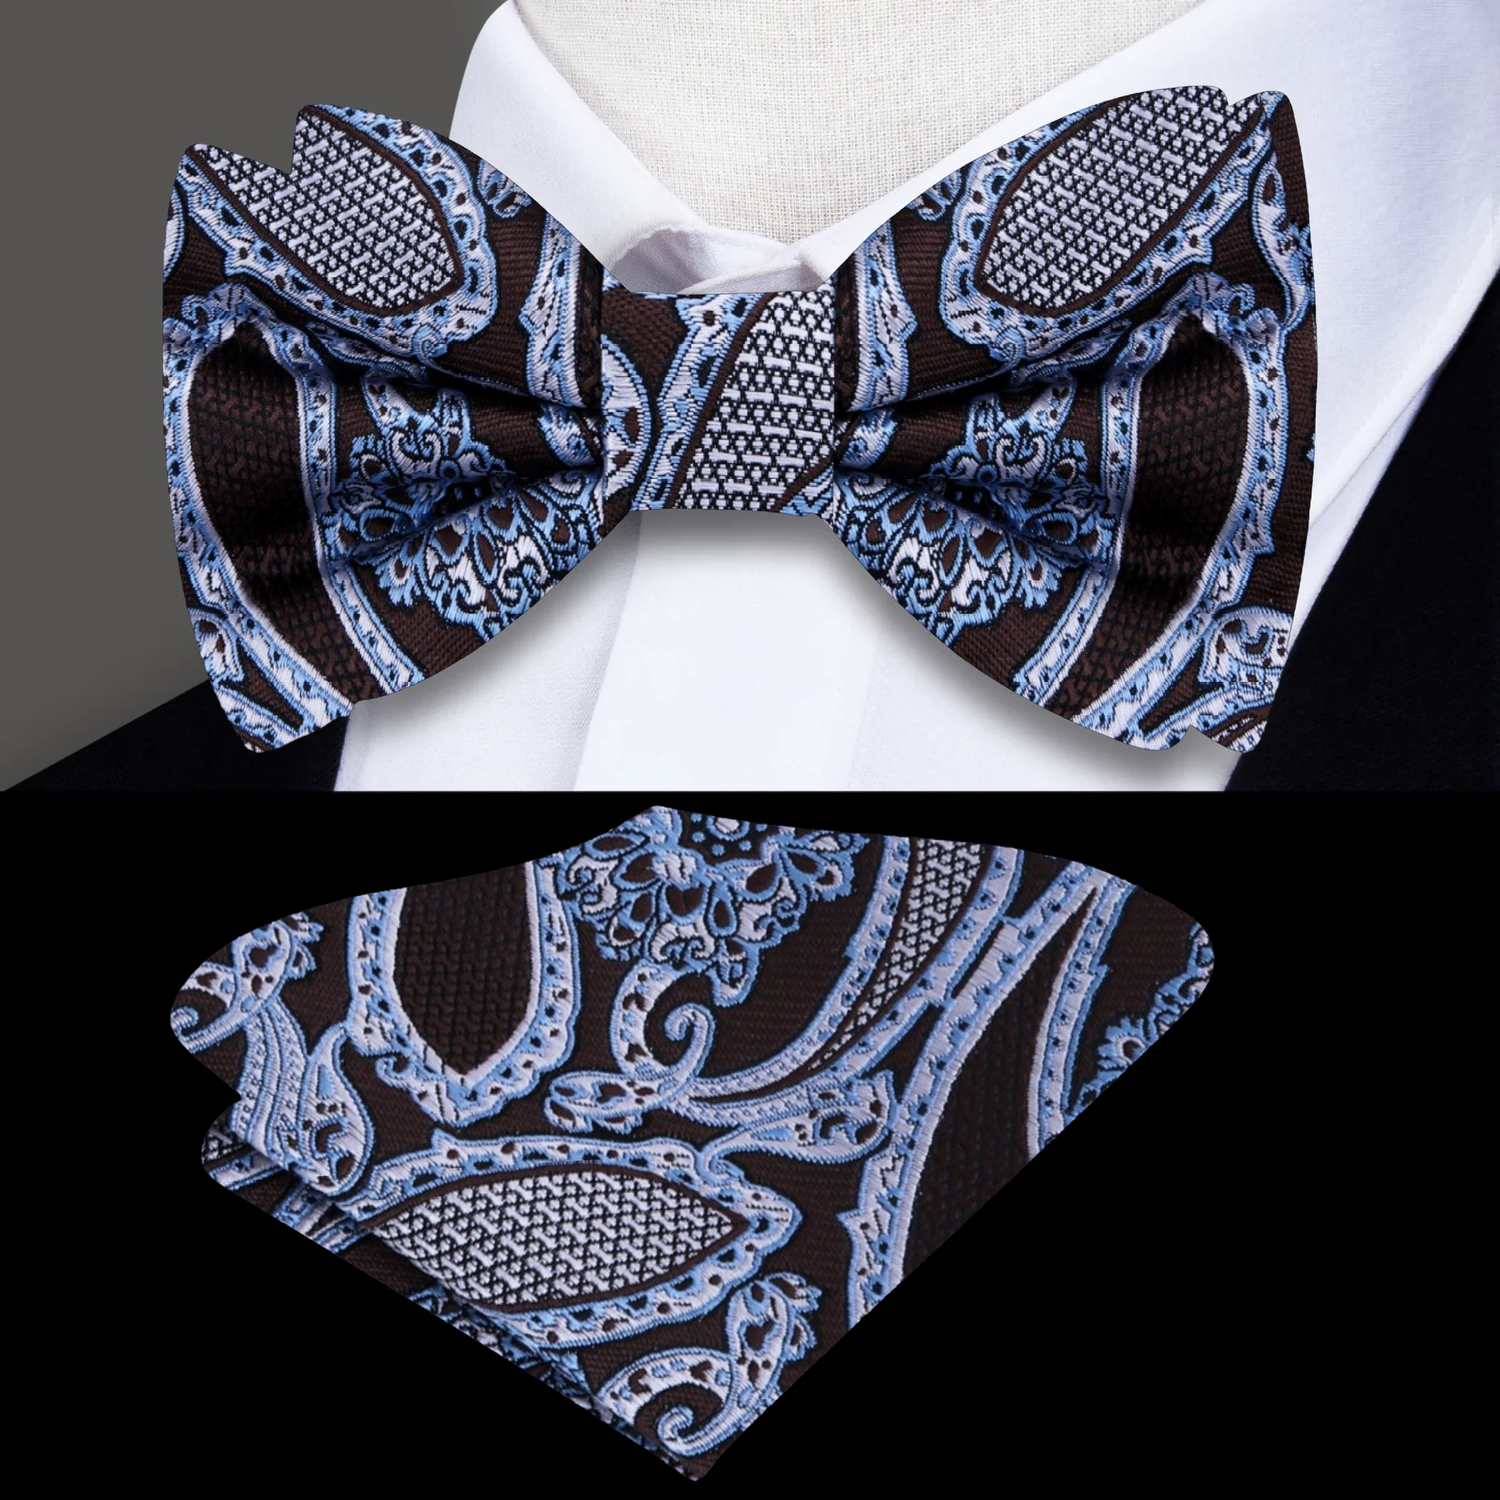 A Brown, White, Ice Blue Detailed Paisley Pattern Silk Pre Tied Bow Tie, Matching Pocket Square